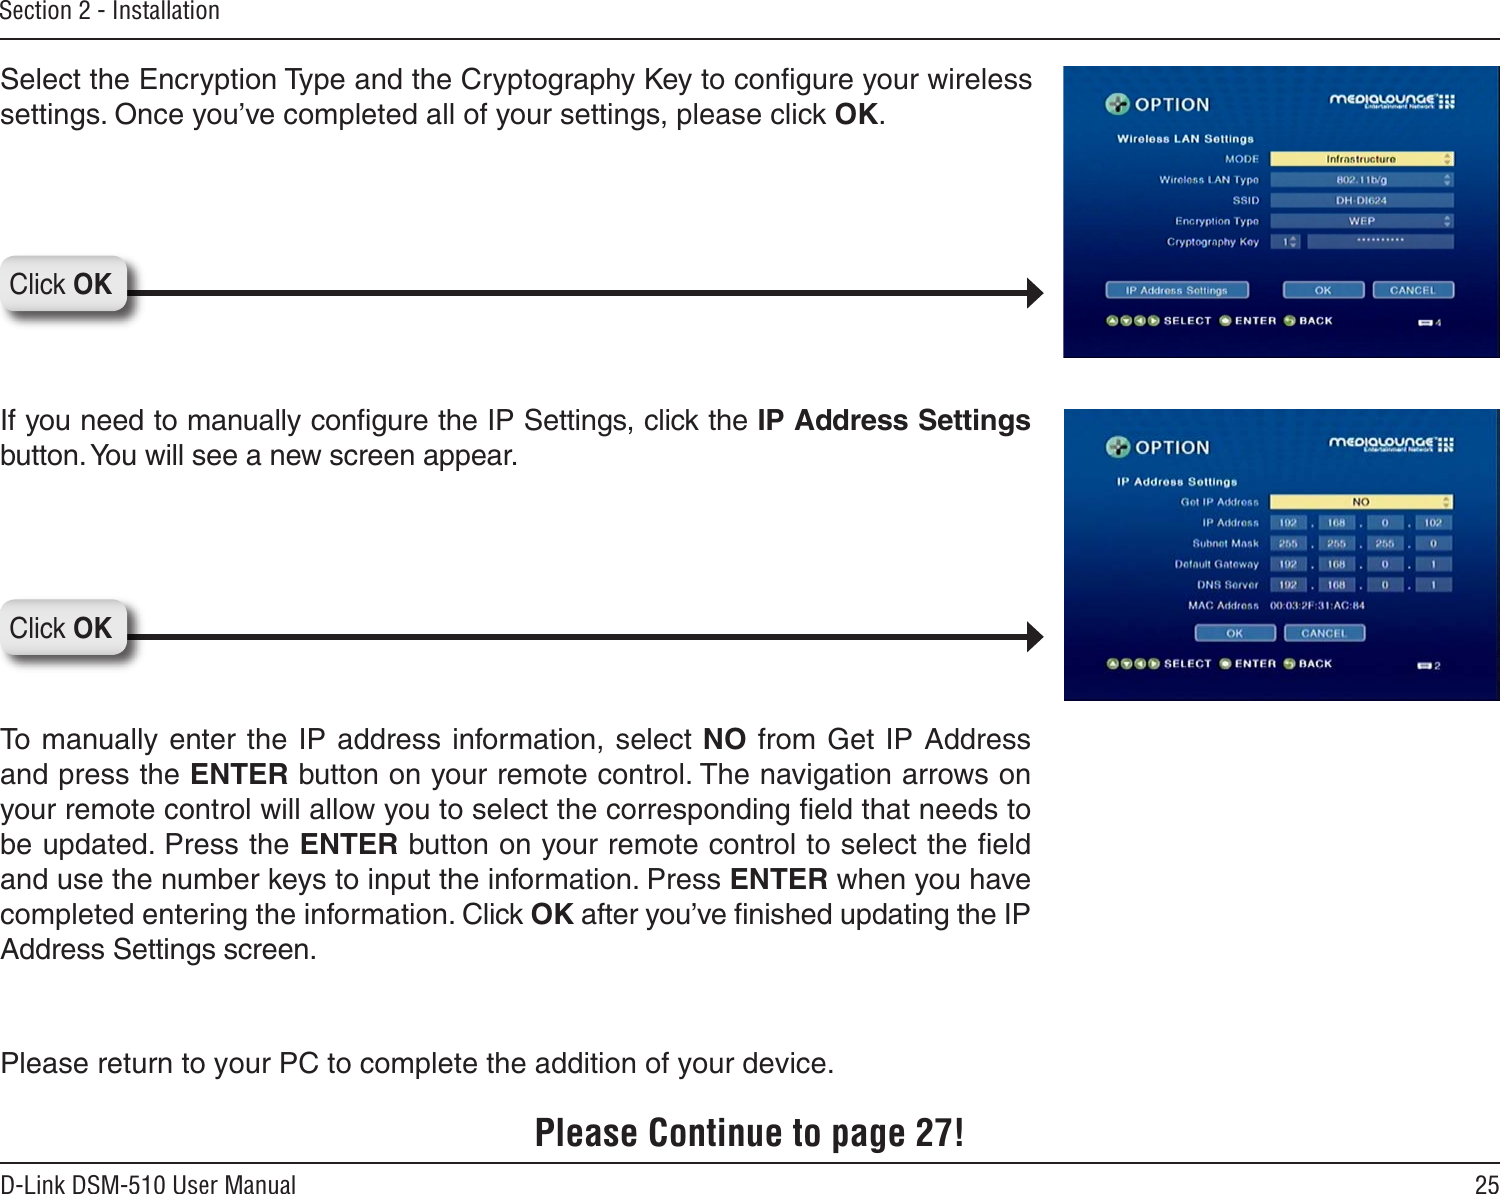 25D-Link DSM-510 User ManualSection 2 - InstallationPlease return to your PC to complete the addition of your device.Please Continue to page 27!Select the Encryption Type and the Cryptography Key to conﬁgure your wireless settings. Once you’ve completed all of your settings, please click OK.If you need to manually conﬁgure the IP Settings, click the IP Address Settings button. You will see a new screen appear. To manually enter the IP address information, select NO  from Get IP Address and press the ENTER button on your remote control. The navigation arrows on your remote control will allow you to select the corresponding ﬁeld that needs to be updated. Press the ENTER button on your remote control to select the ﬁeld and use the number keys to input the information. Press ENTER when you have completed entering the information. Click OK after you’ve ﬁnished updating the IP Address Settings screen.Click OKClick OK